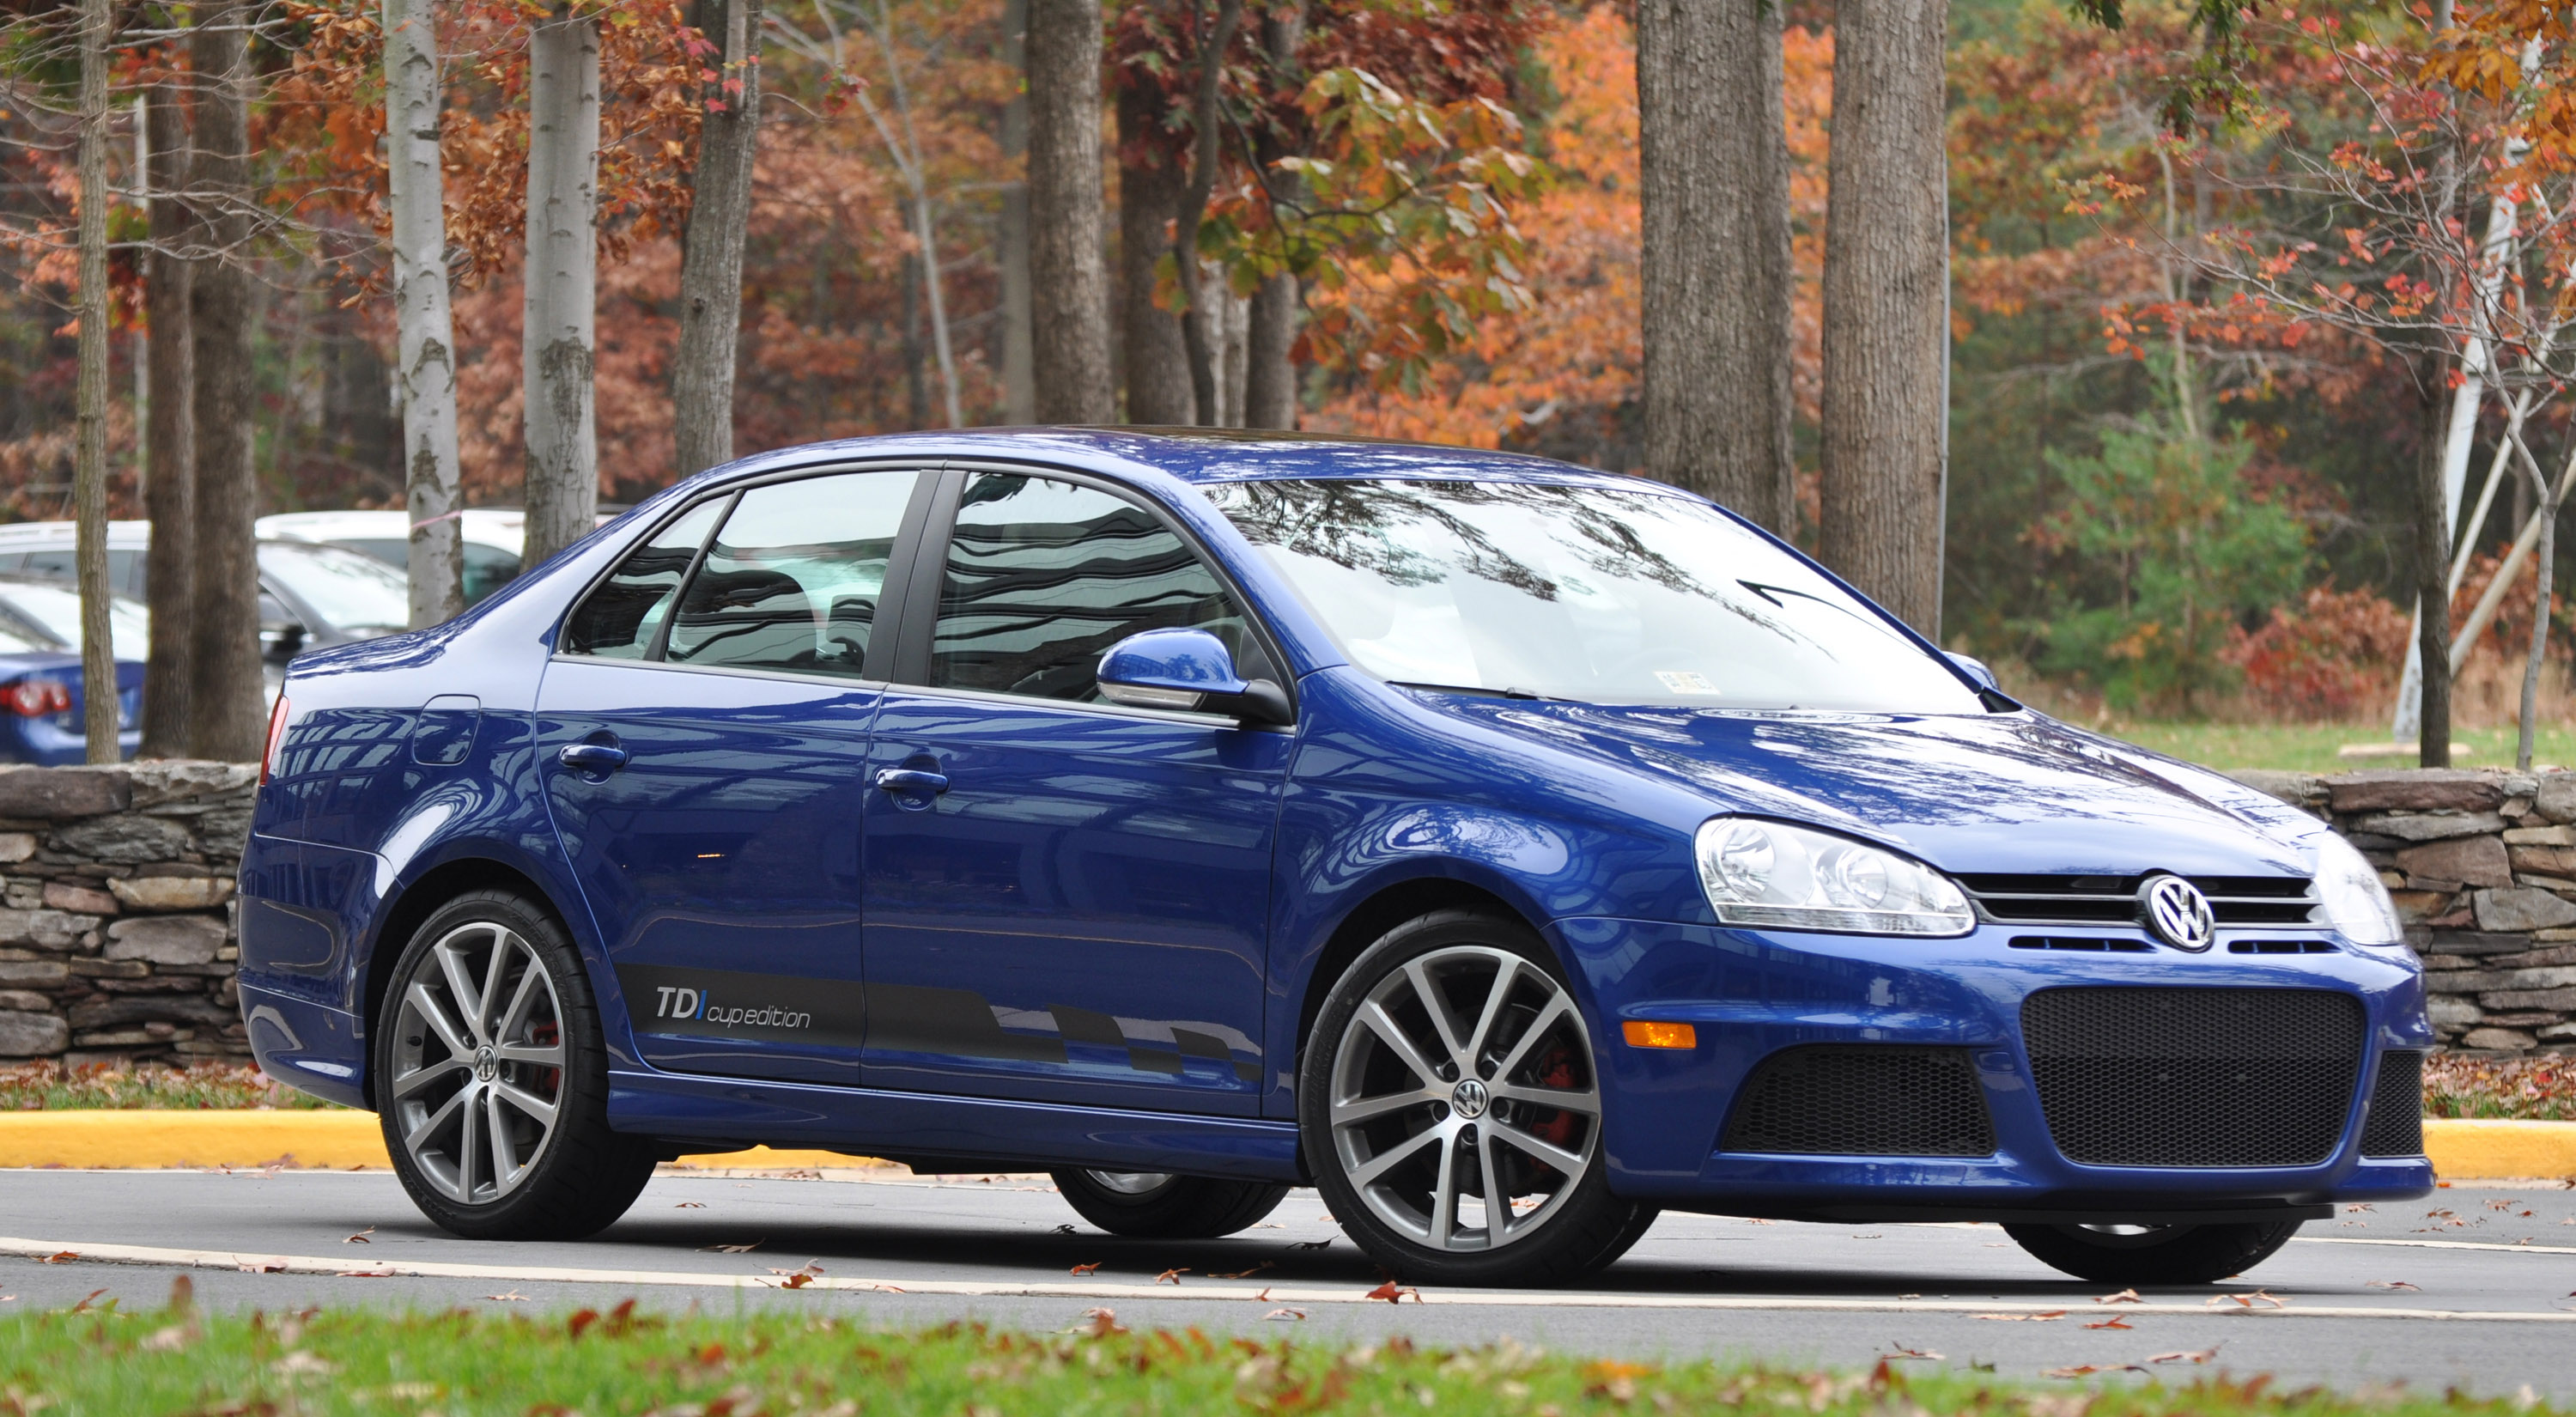 2010 VW Jetta TDI Cup Street Edition - enthusiasts are gonna love it